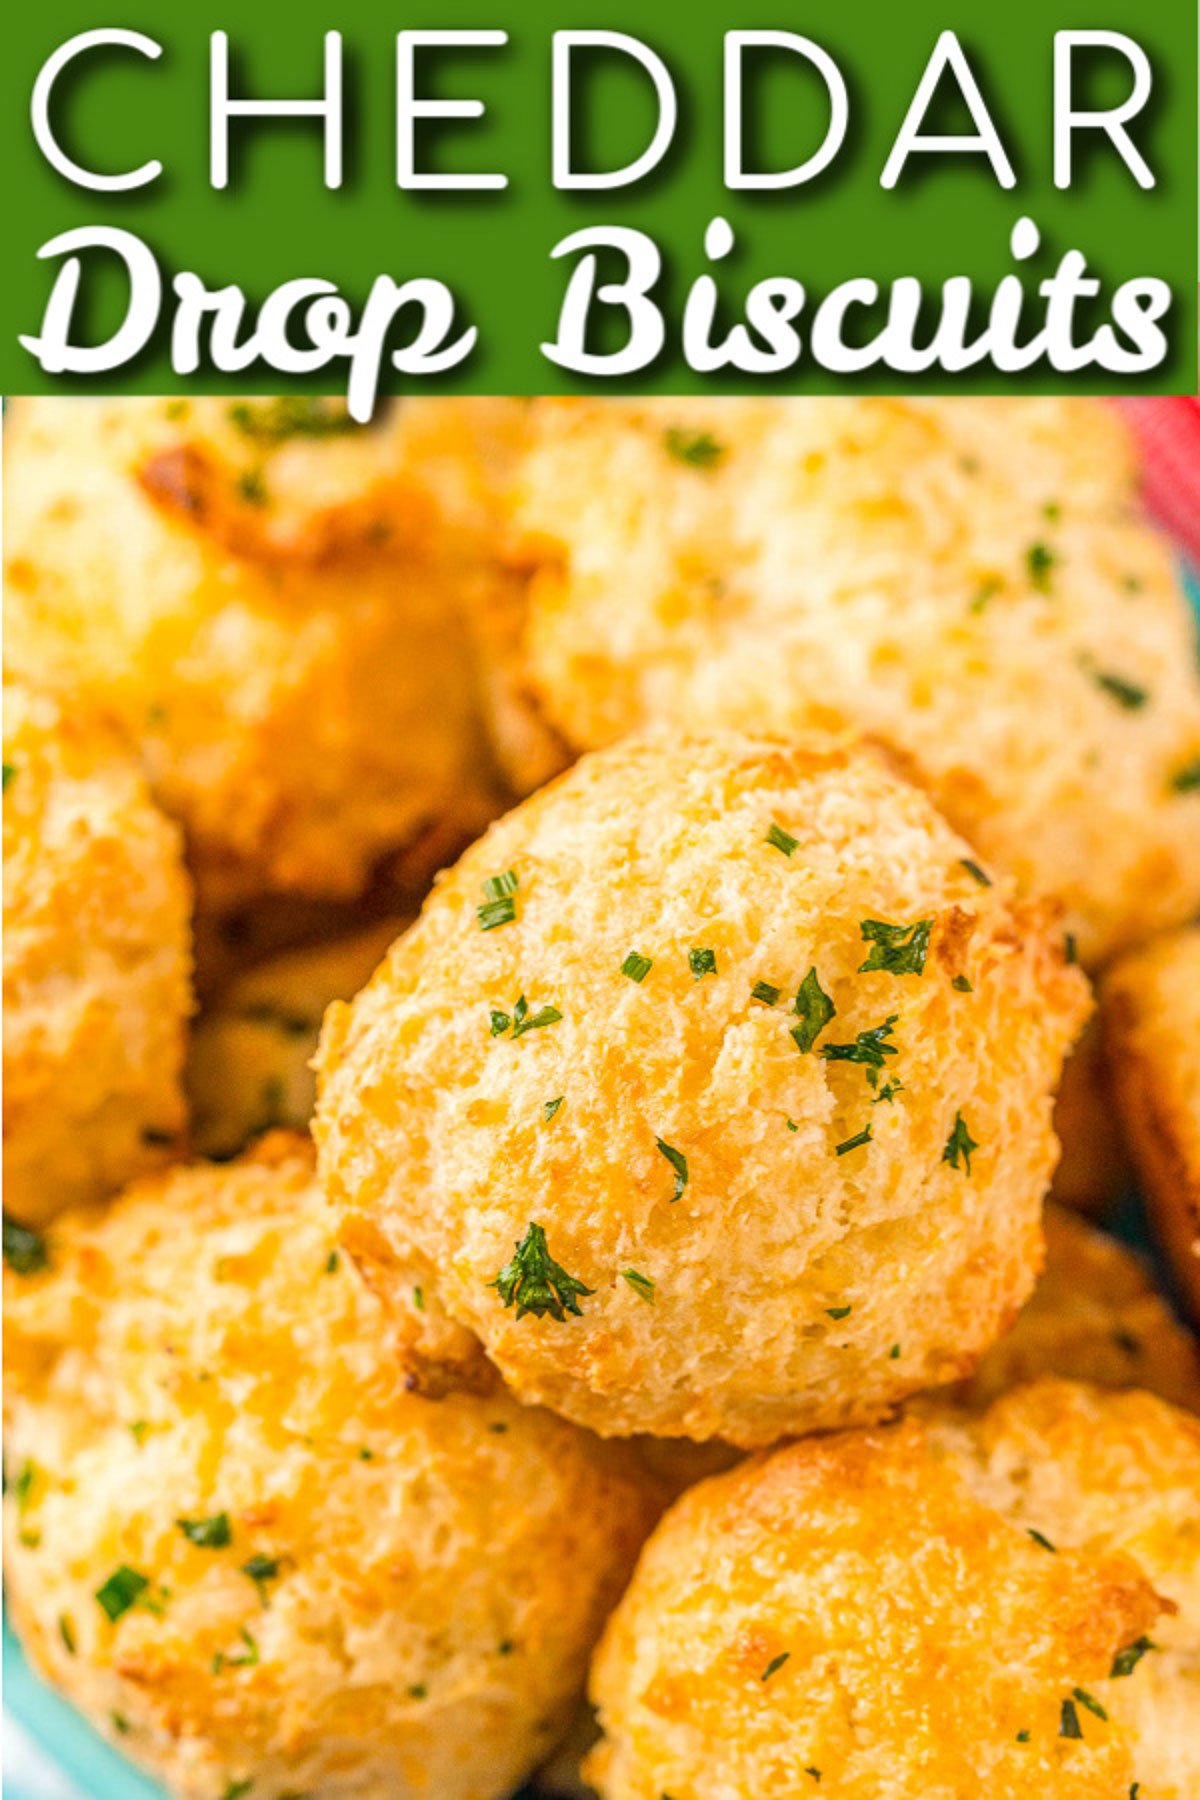 These Cheddar Drop Biscuits are loaded with Cheddar and Colby Jack Cheese and garlic flavor. They're a savory, buttery, and cheesy biscuit recipe everyone will love! via @sugarandsoulco